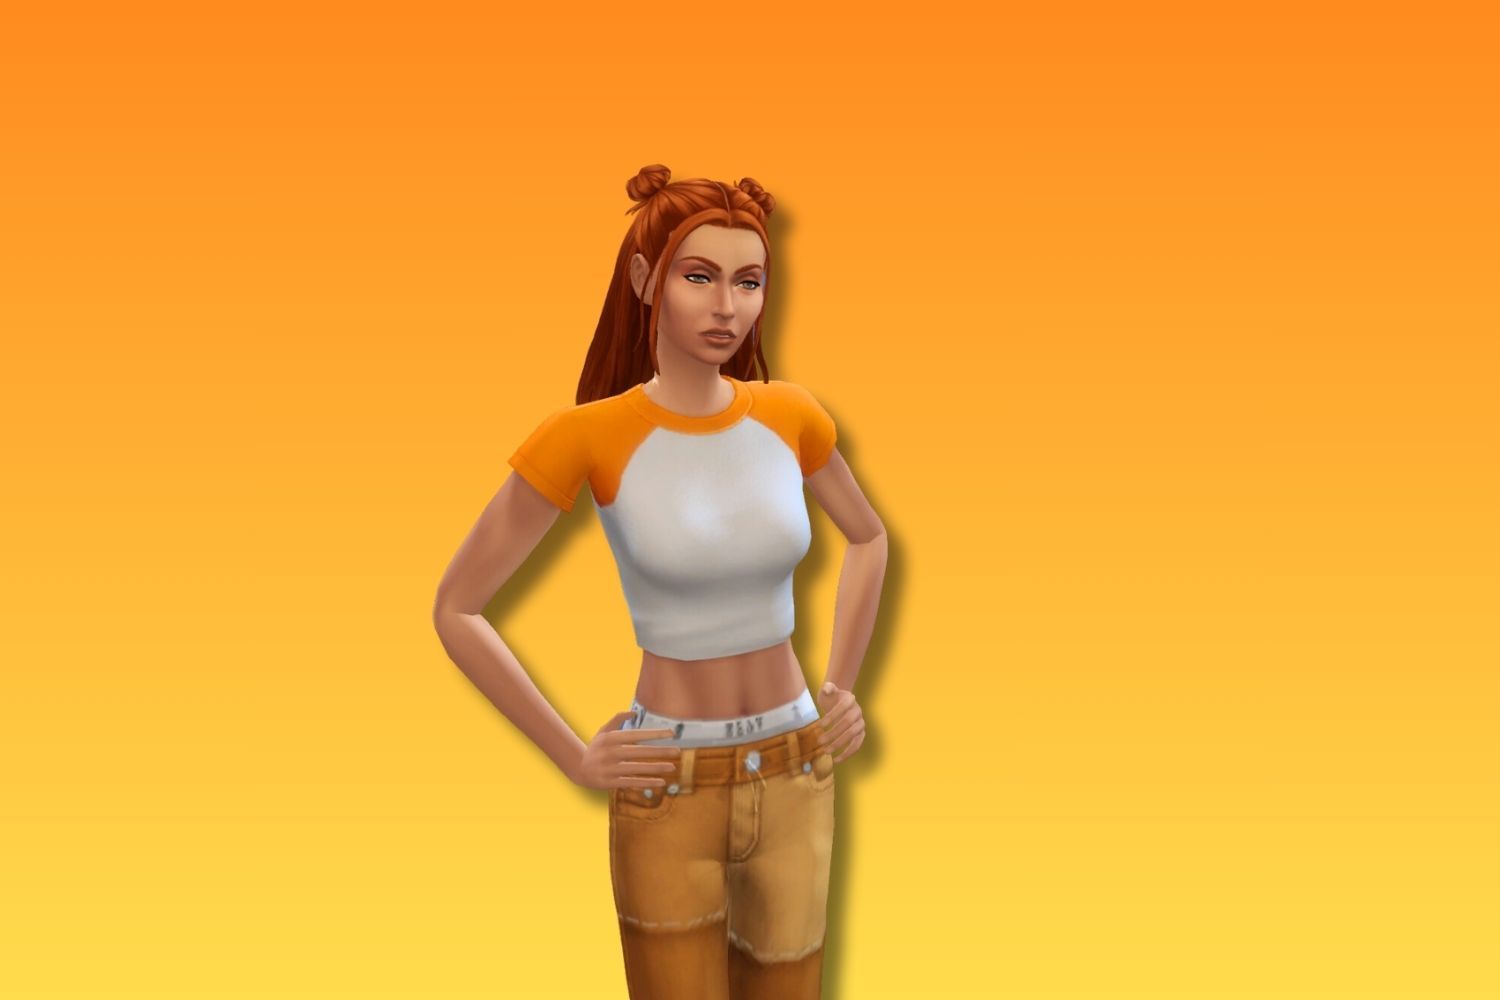 A young feminine Sim appears frustrated as she dons a completely orange outfit, which matches her orange hair.